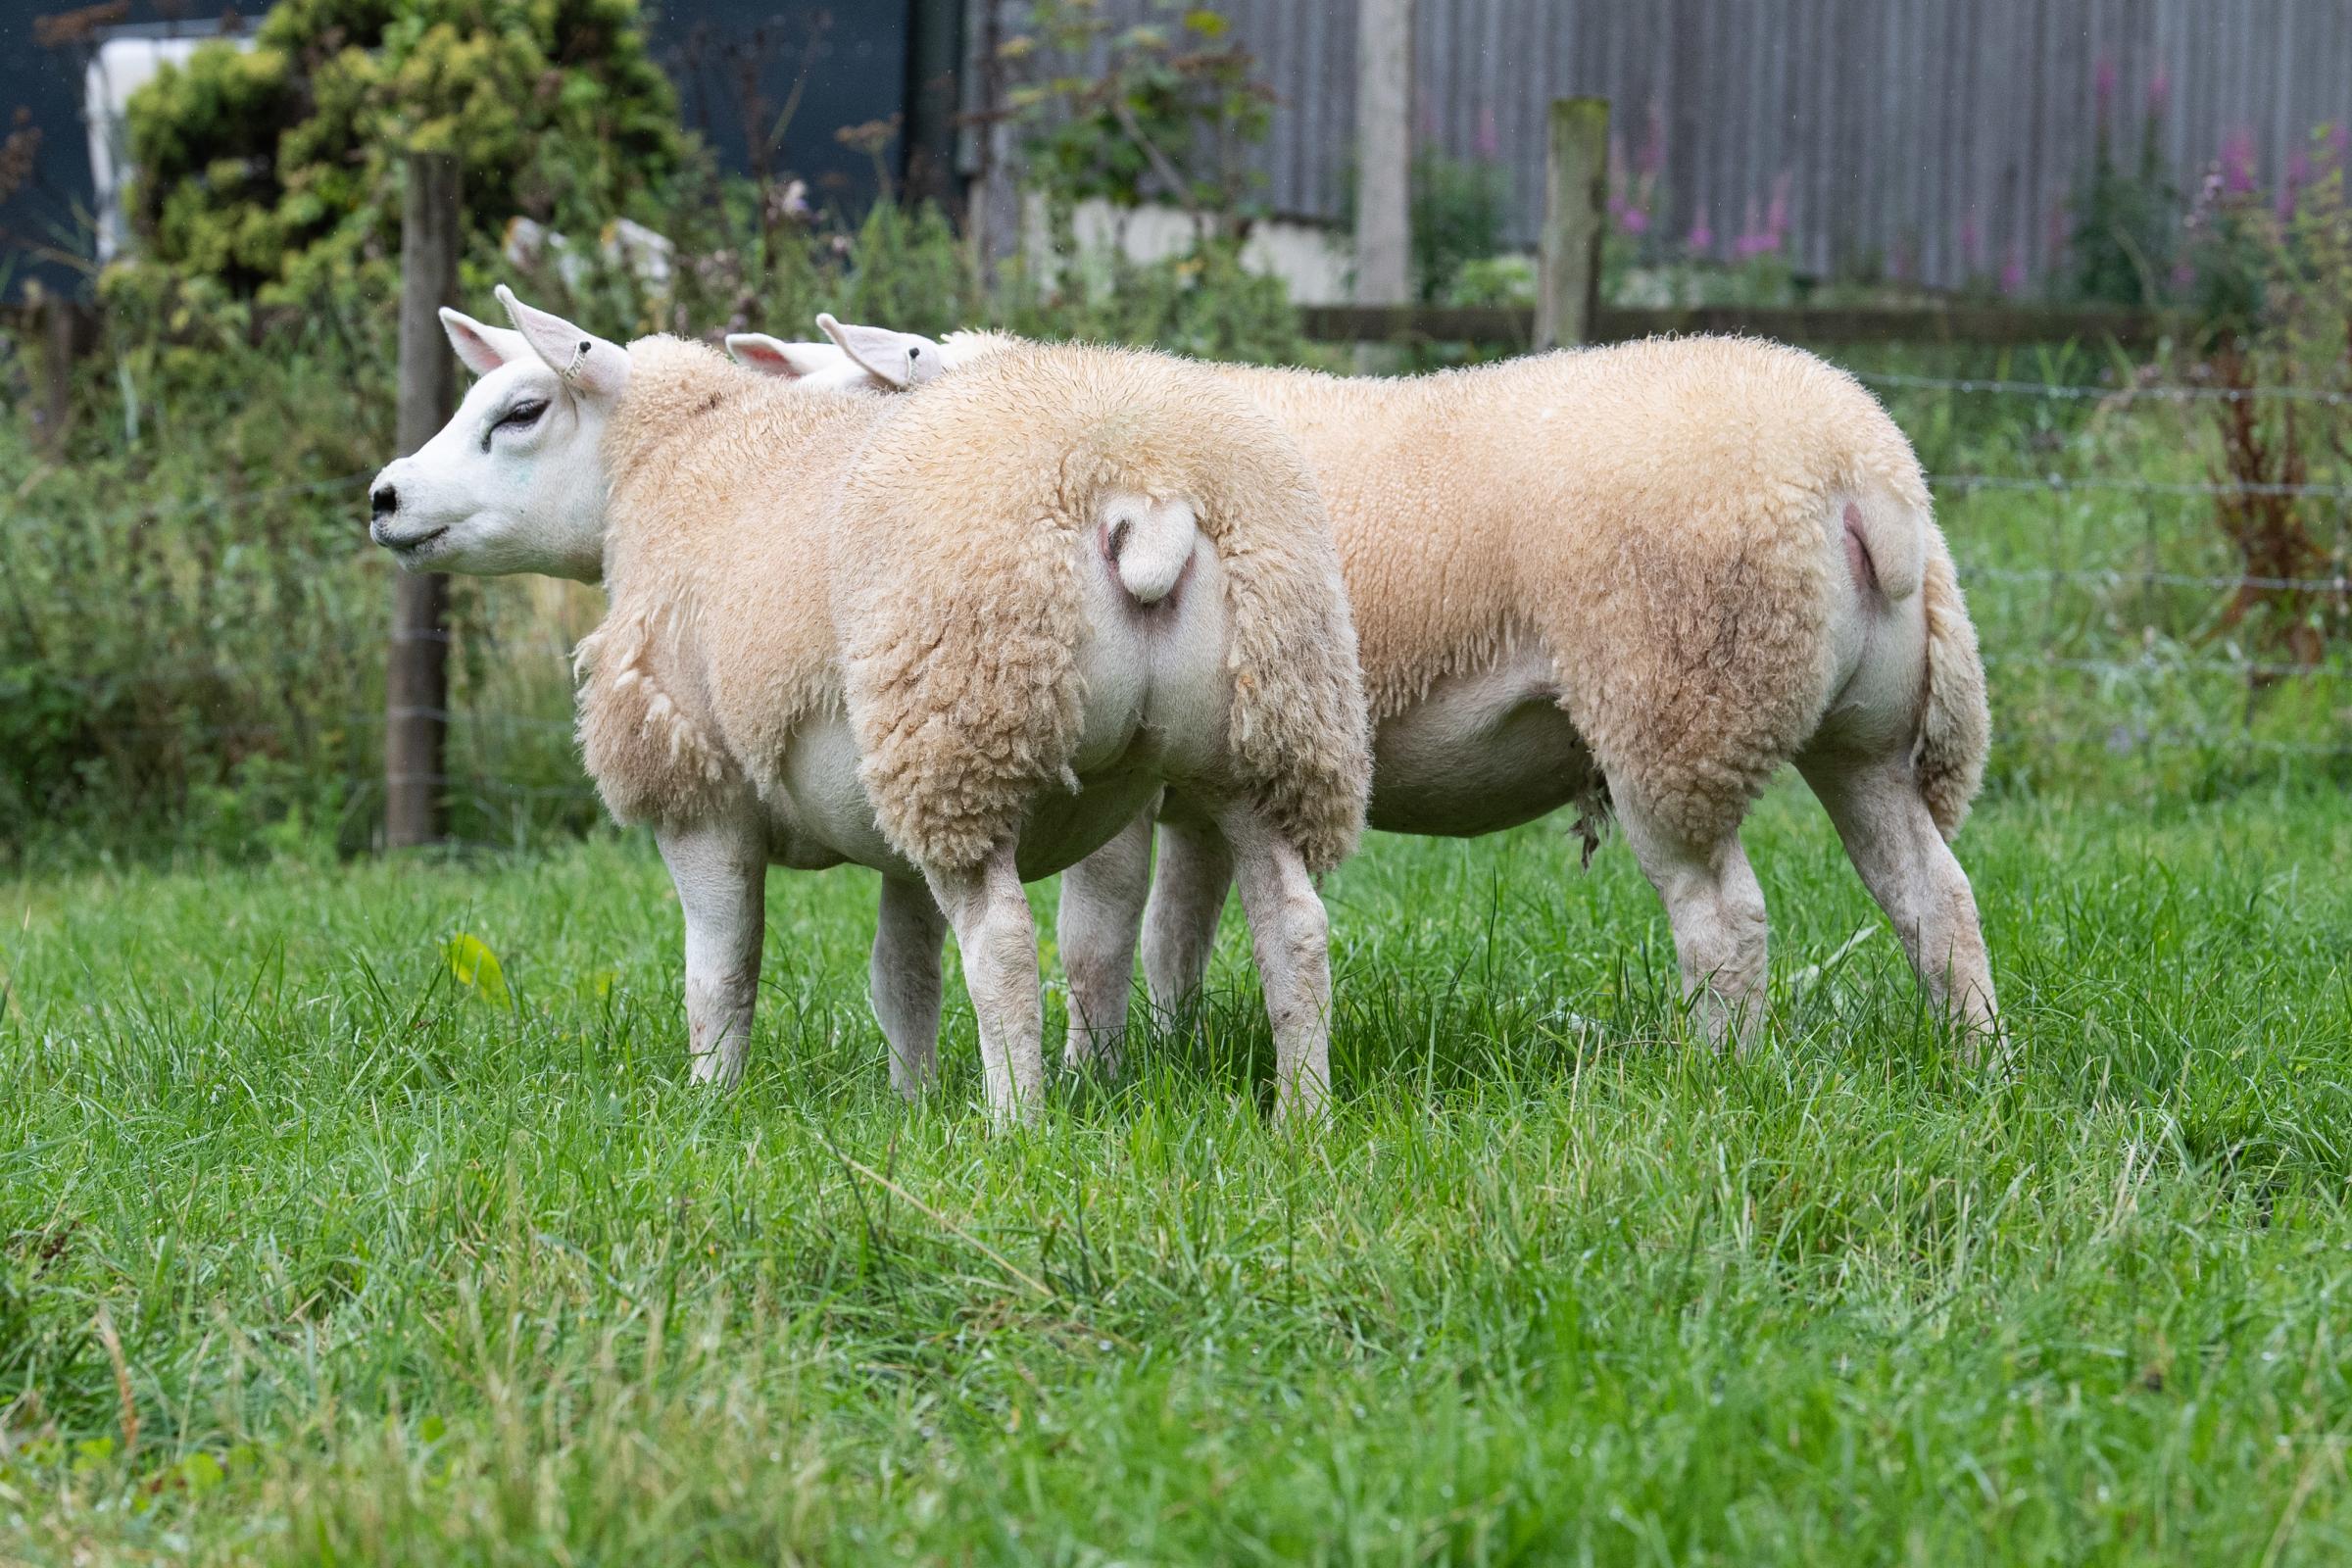 Good, well-shaped body, with gigot and frame, and correct on its legs is key at Knock Ref:RH090821101 Rob Haining / The Scottish Farmer...